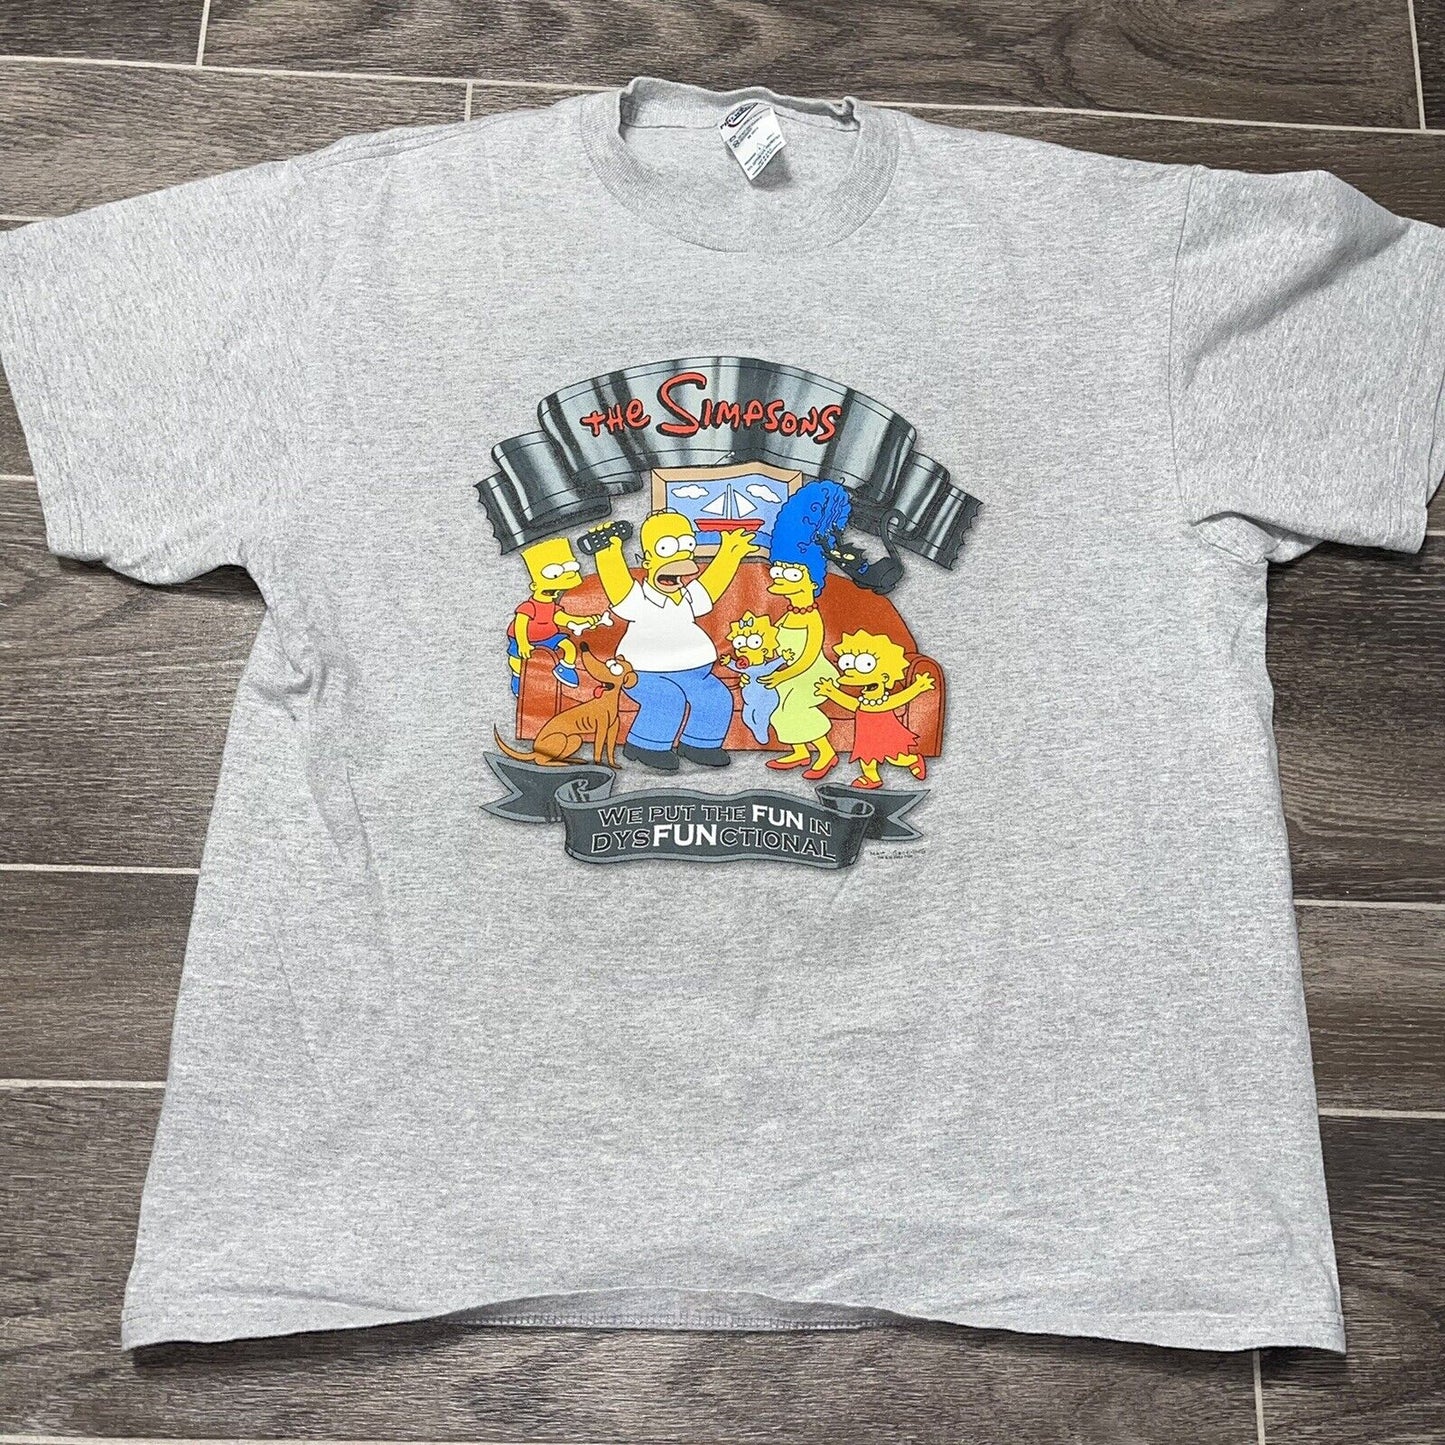 The Simpsons - " We Put the Fun in Dysfunctional " Large Grey T-shirt